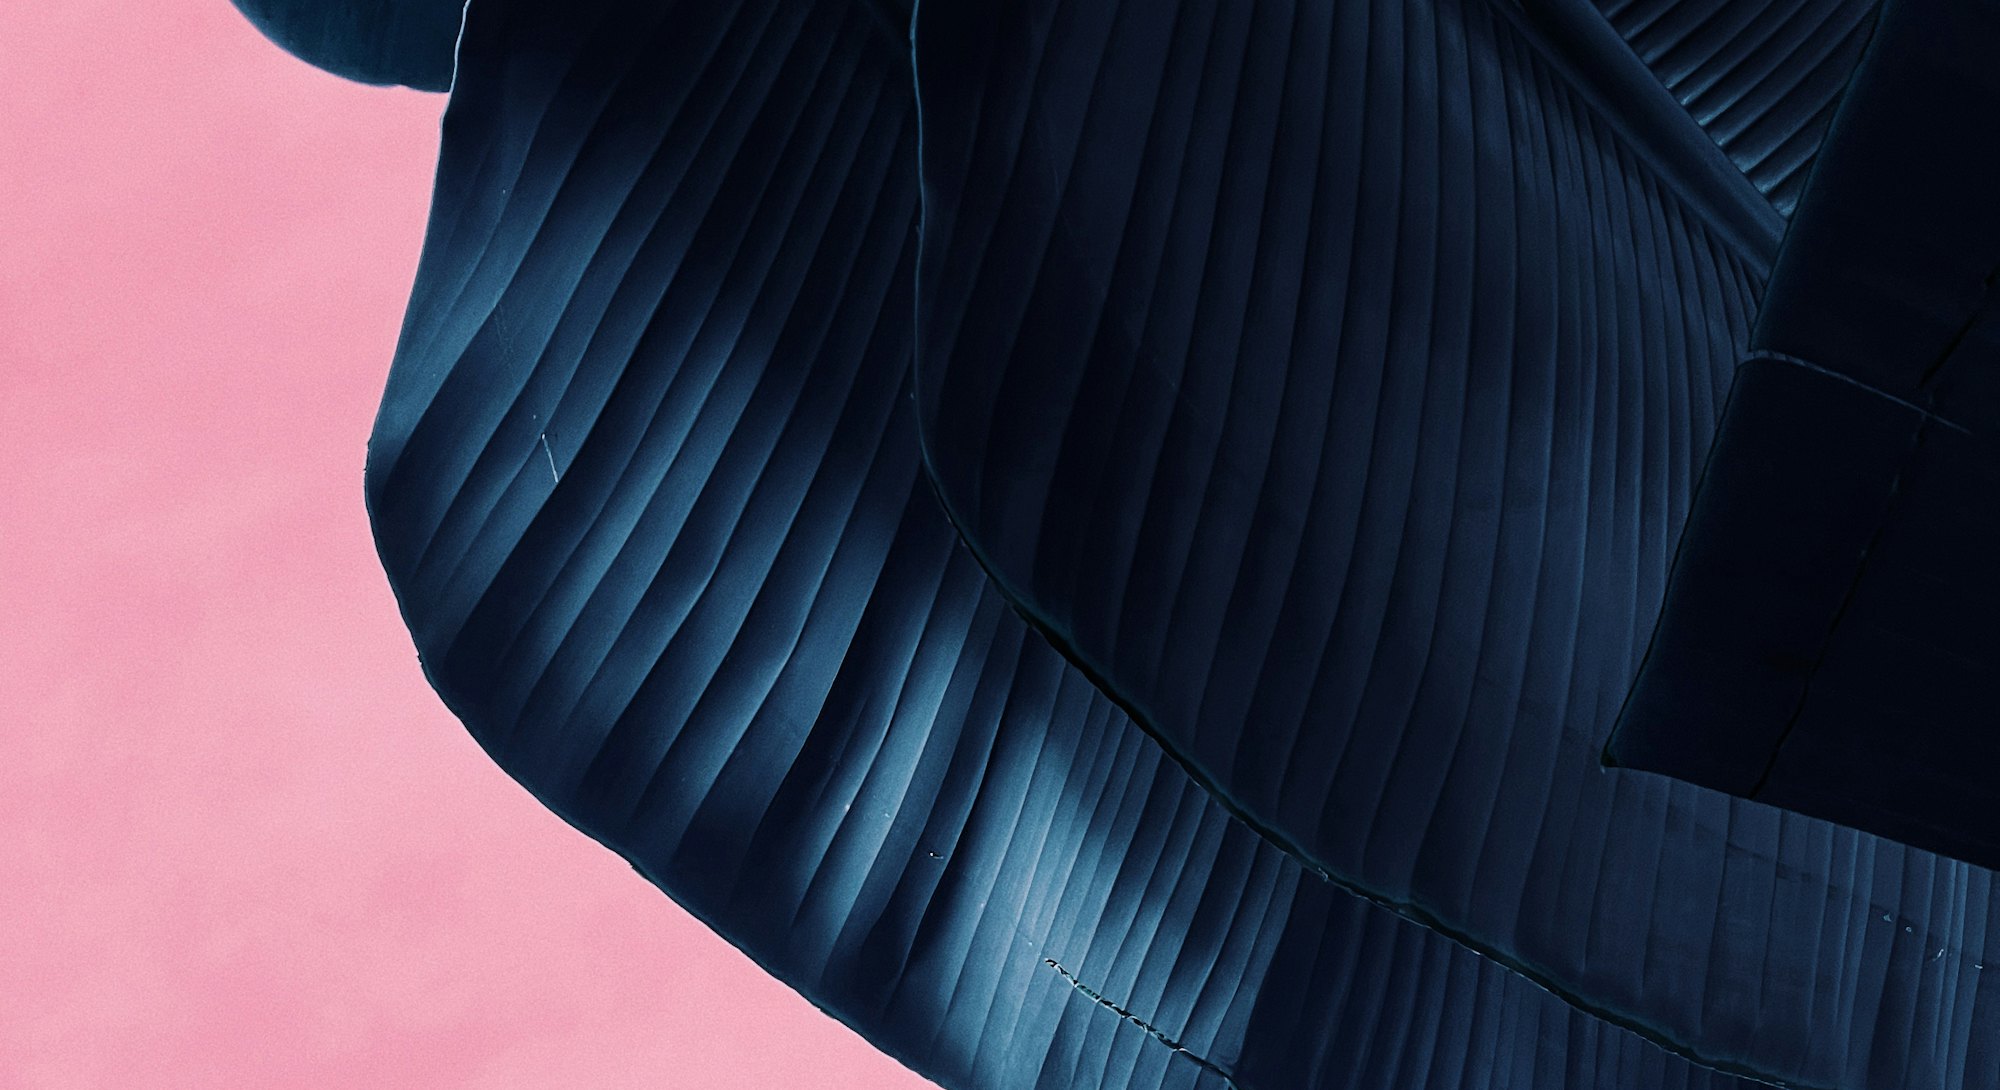 A blue leaf on a pink background. Apple partnered with female photographers for an International Wom...